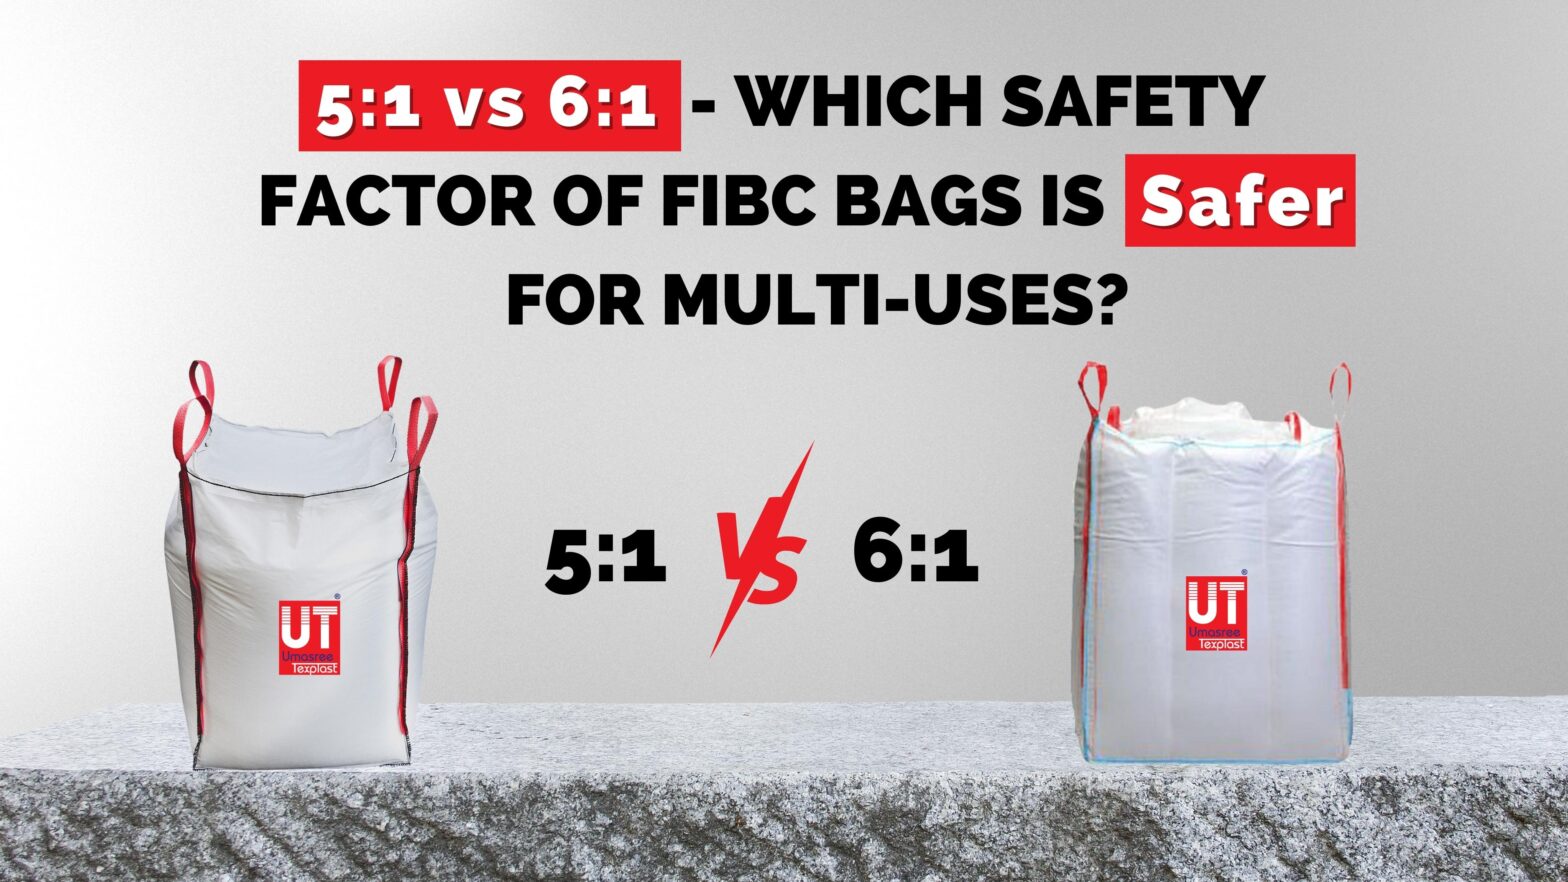 5:1 vs. 6:1 – Which Safety Factor of FIBC Bags is Safer for Multi-Uses?